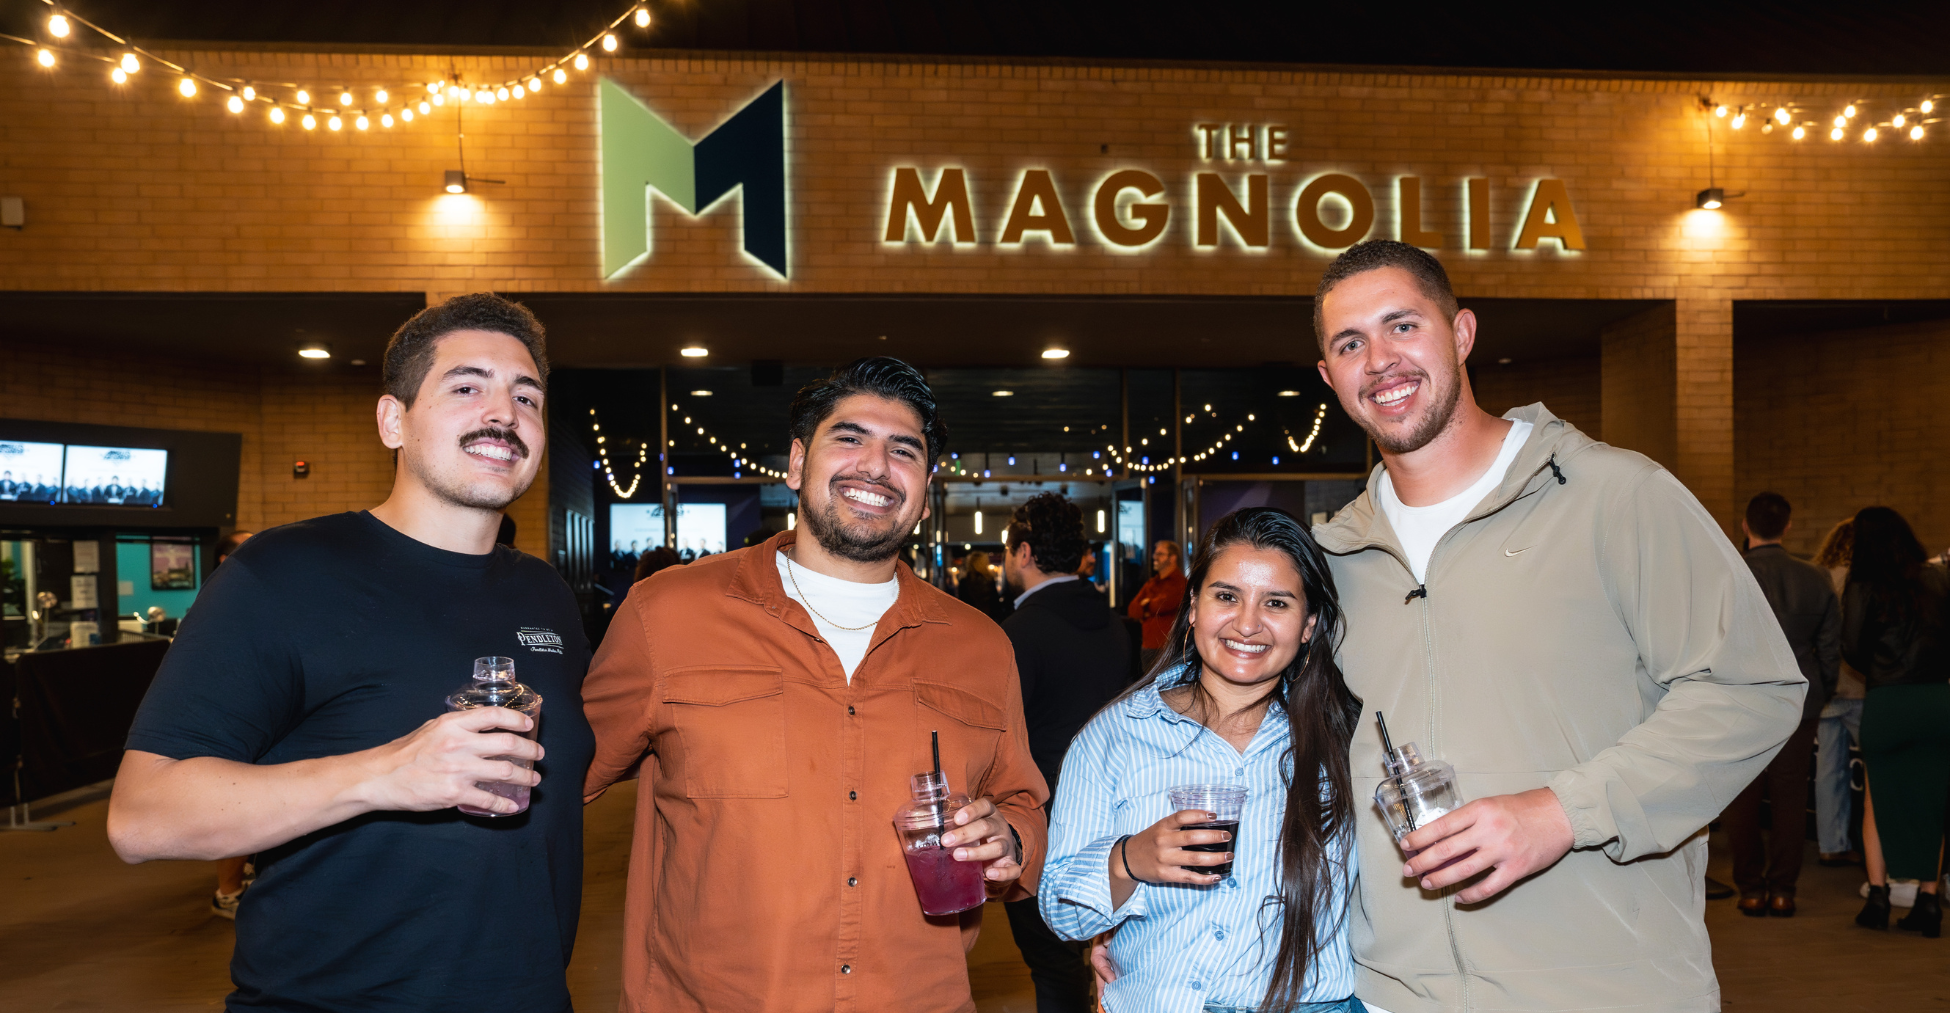 Fans_Outside_TheMagnolia_WebsiteGallery_1950x1013.png